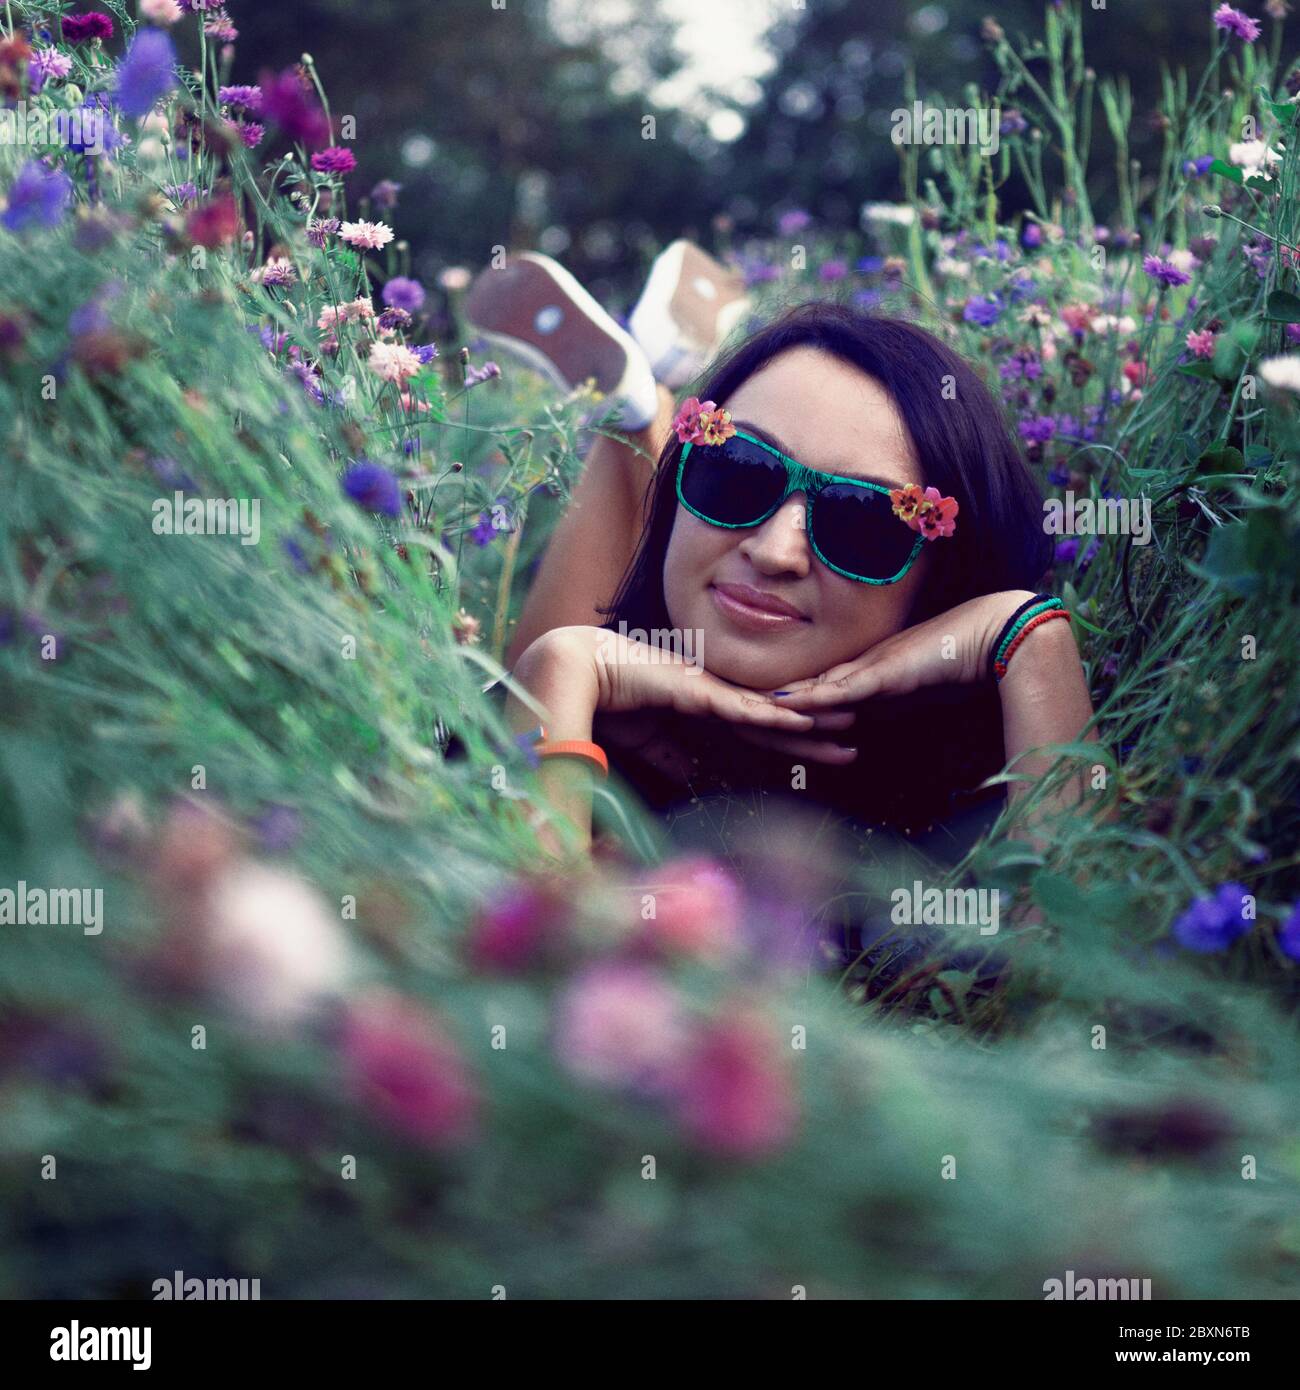 Young beautiful girl in sunglasses laying on the corn flowers field. Outdoor portrait, summer fun concept. Lifestyle photography. Stock Photo